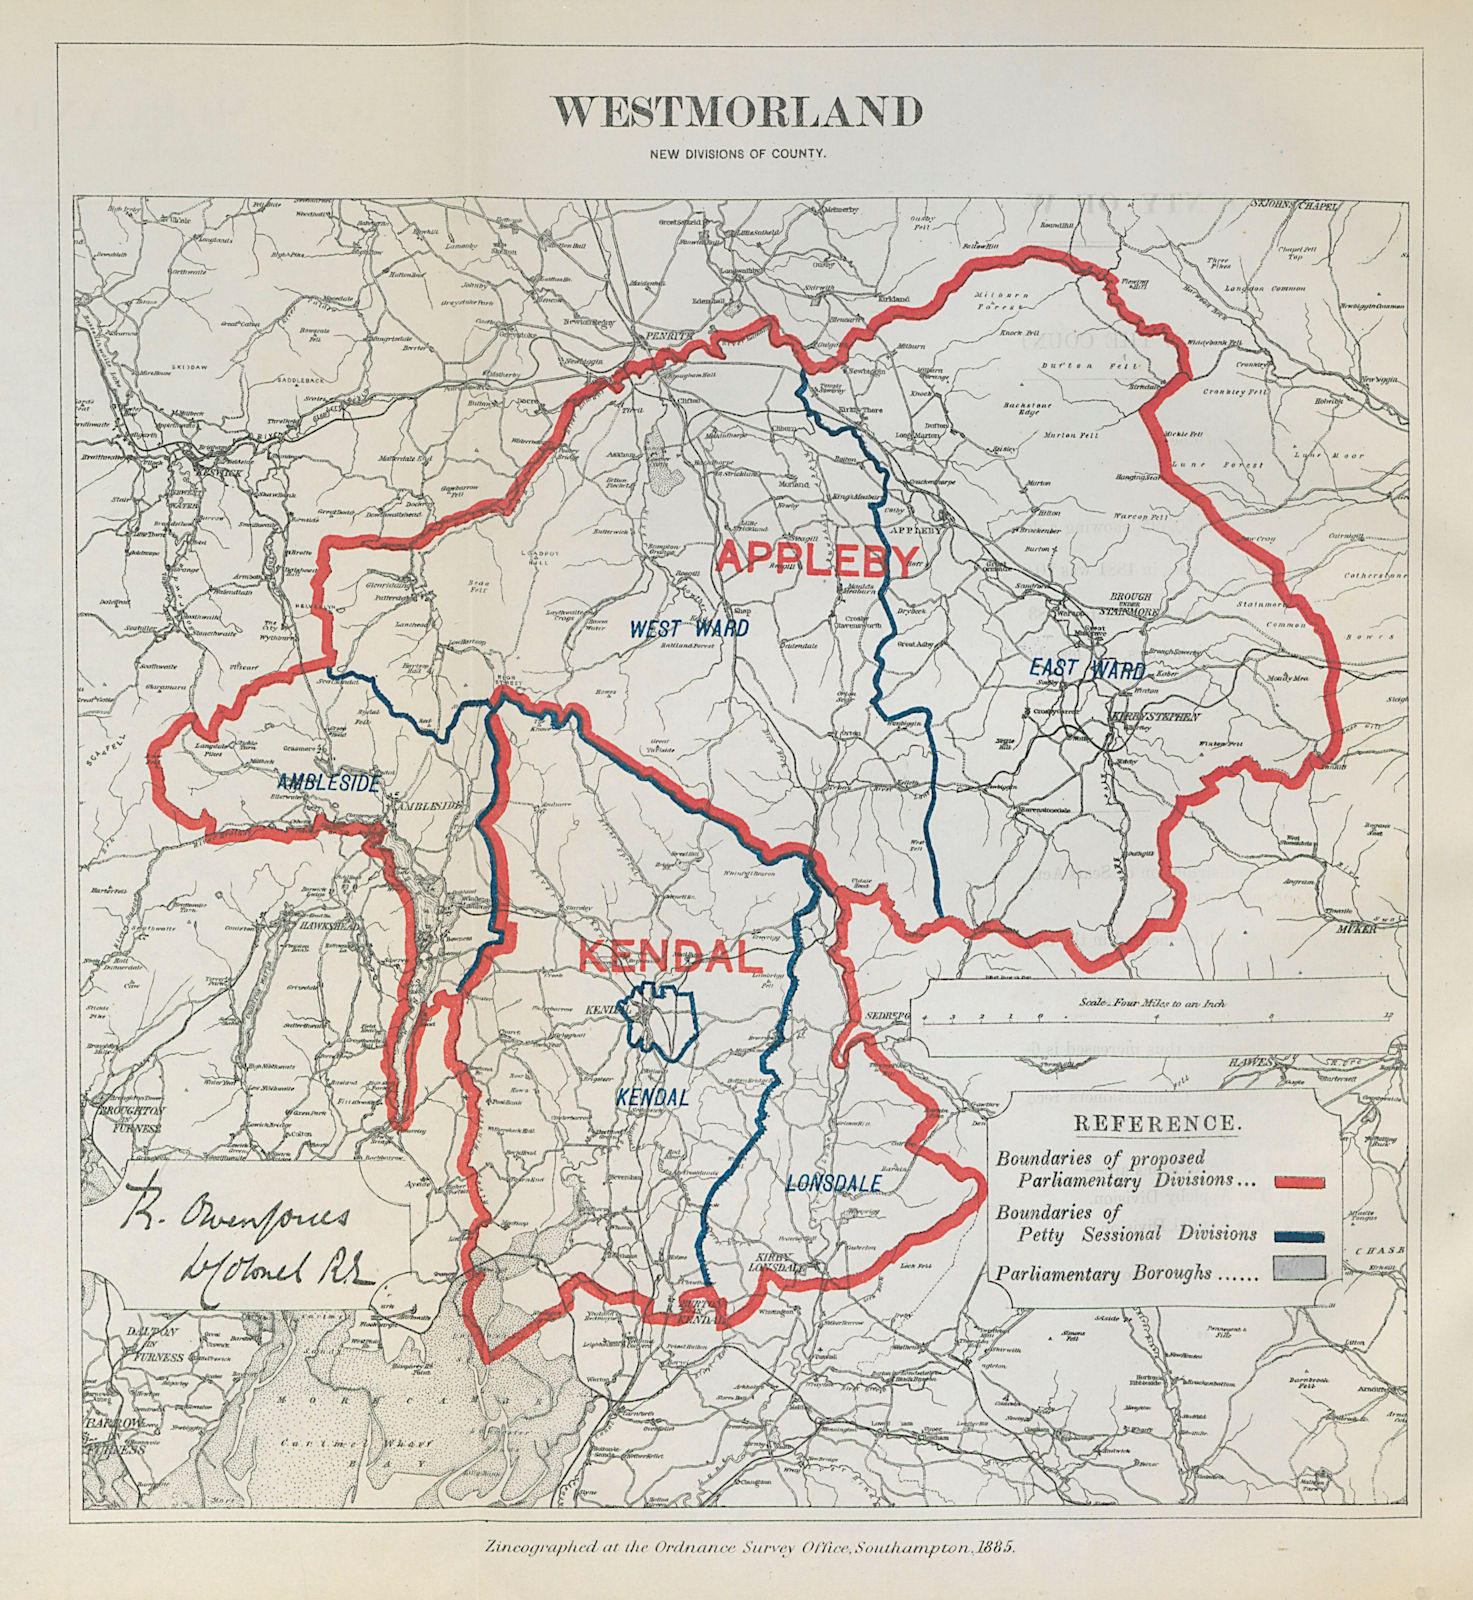 Associate Product Westmorland Parliamentary Divisions. Appleby Kendal BOUNDARY COMMISSION 1885 map